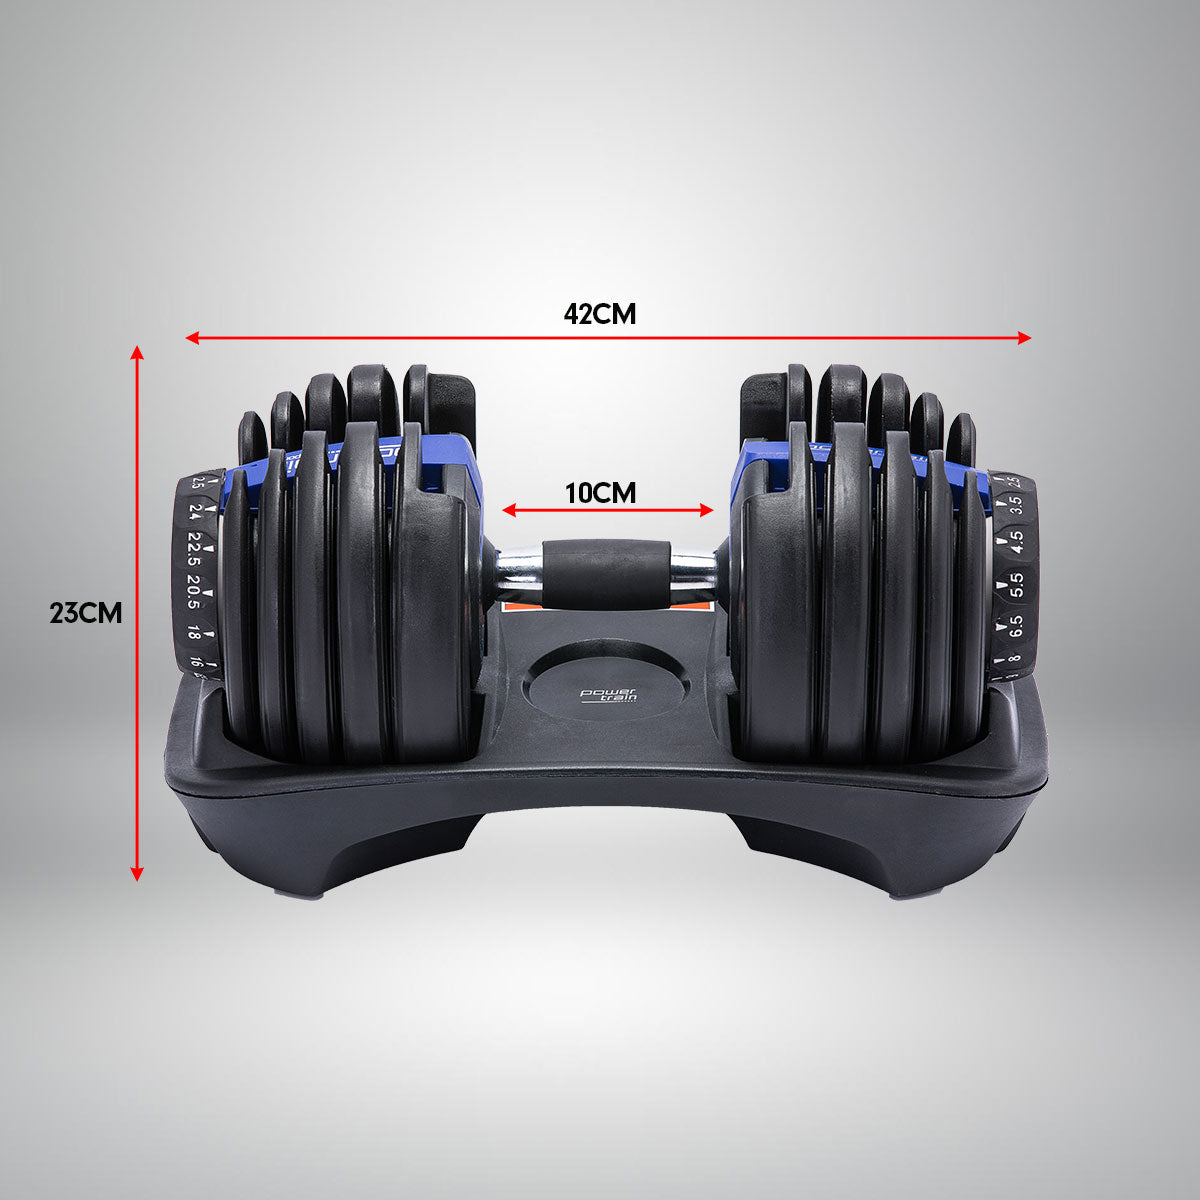 Powertrain 48KG Adjustable Dumbbell Set With Stand Blue